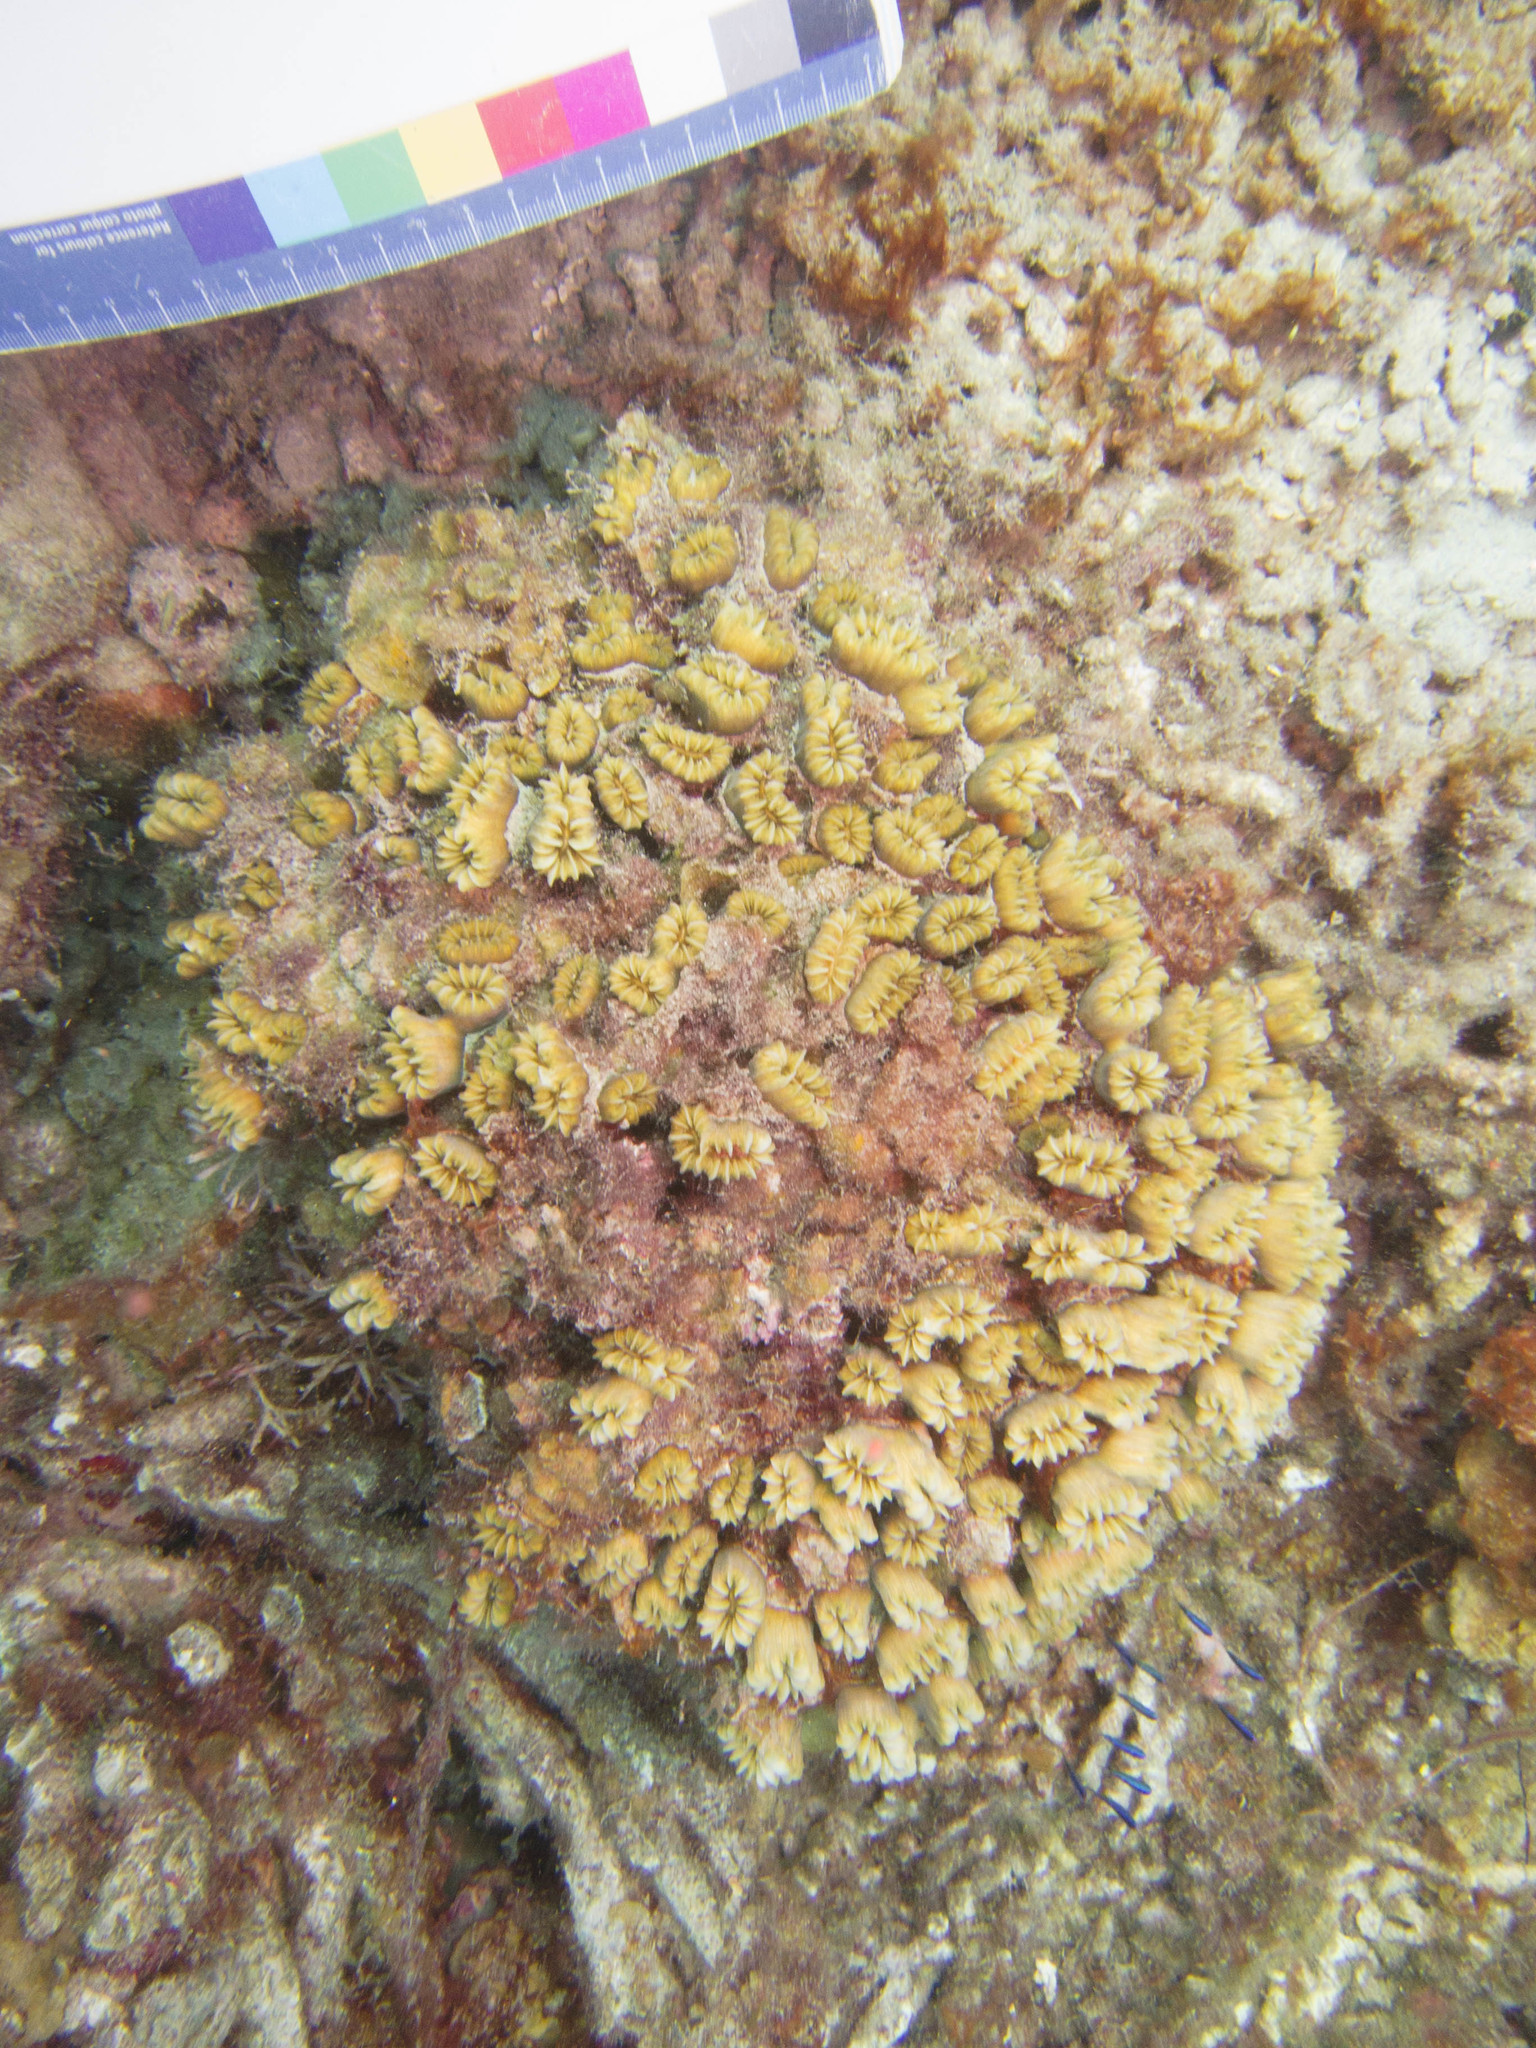 Image of Smooth Flower Coral